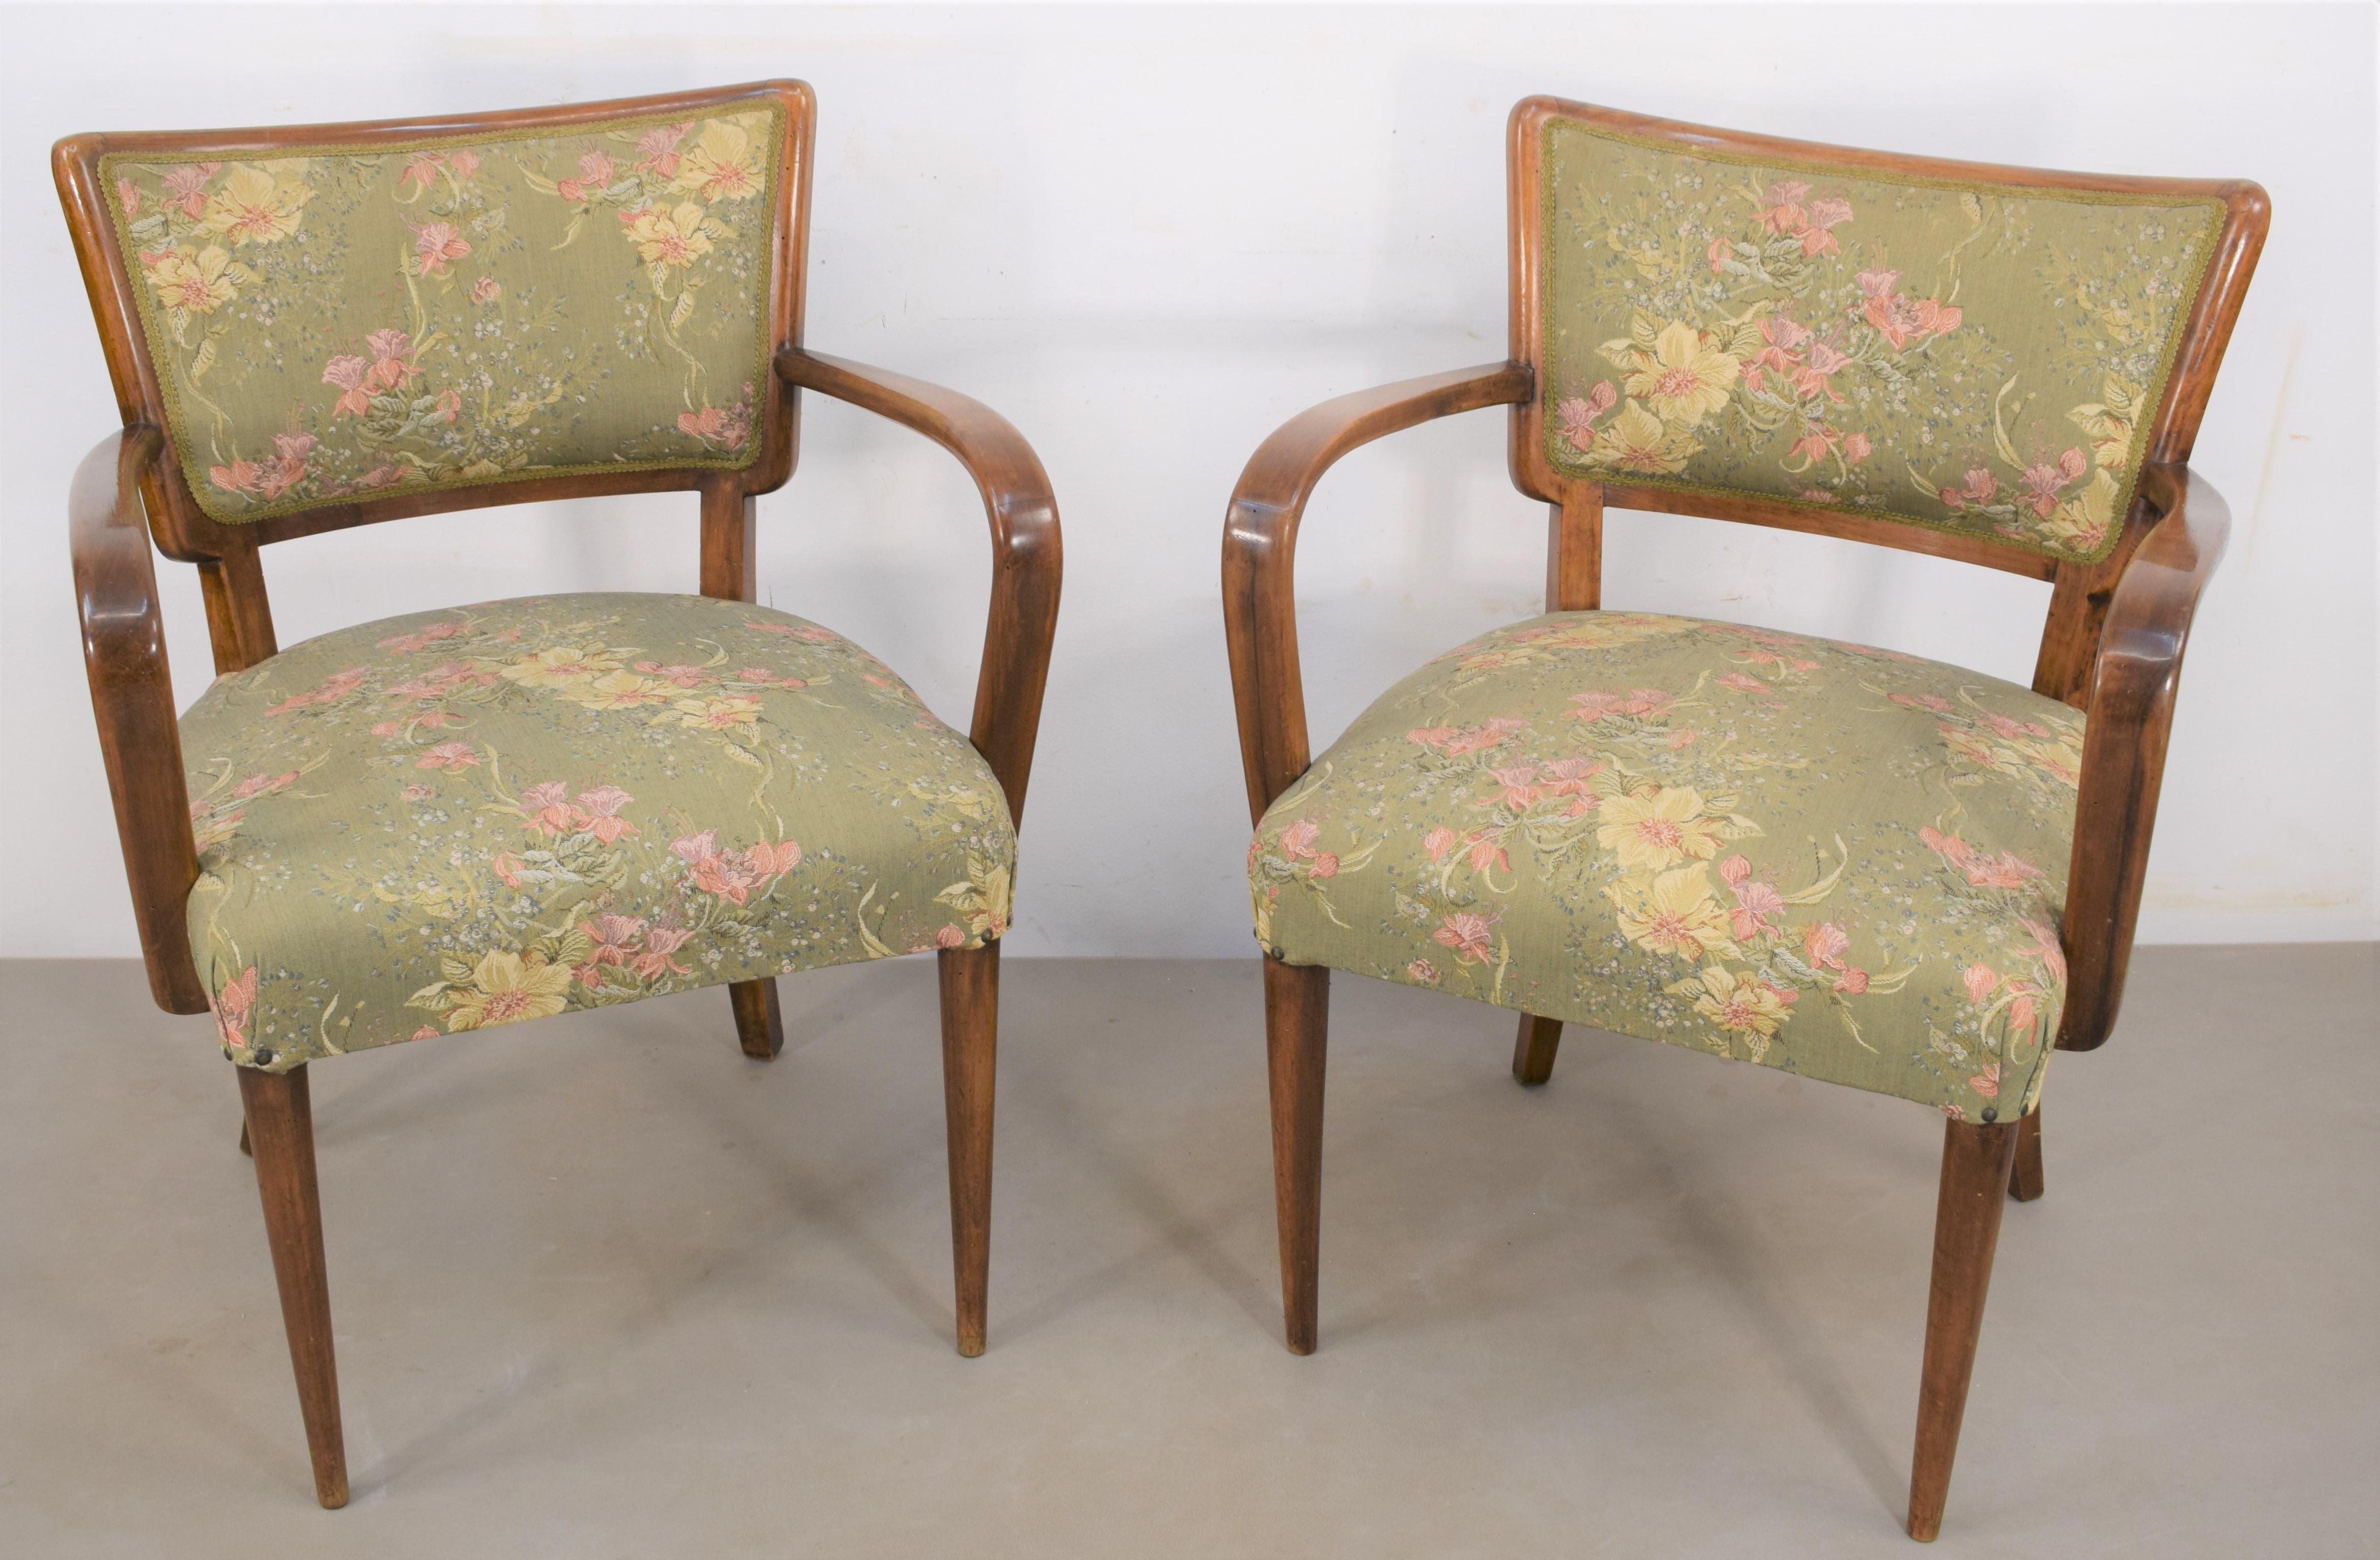 Osvaldo Borsani attributed, set of two armchairs, 1940s.
Dimensions: H= 83 cm; W= 61 cm; D= 56 cm; Height seat=45 cm.